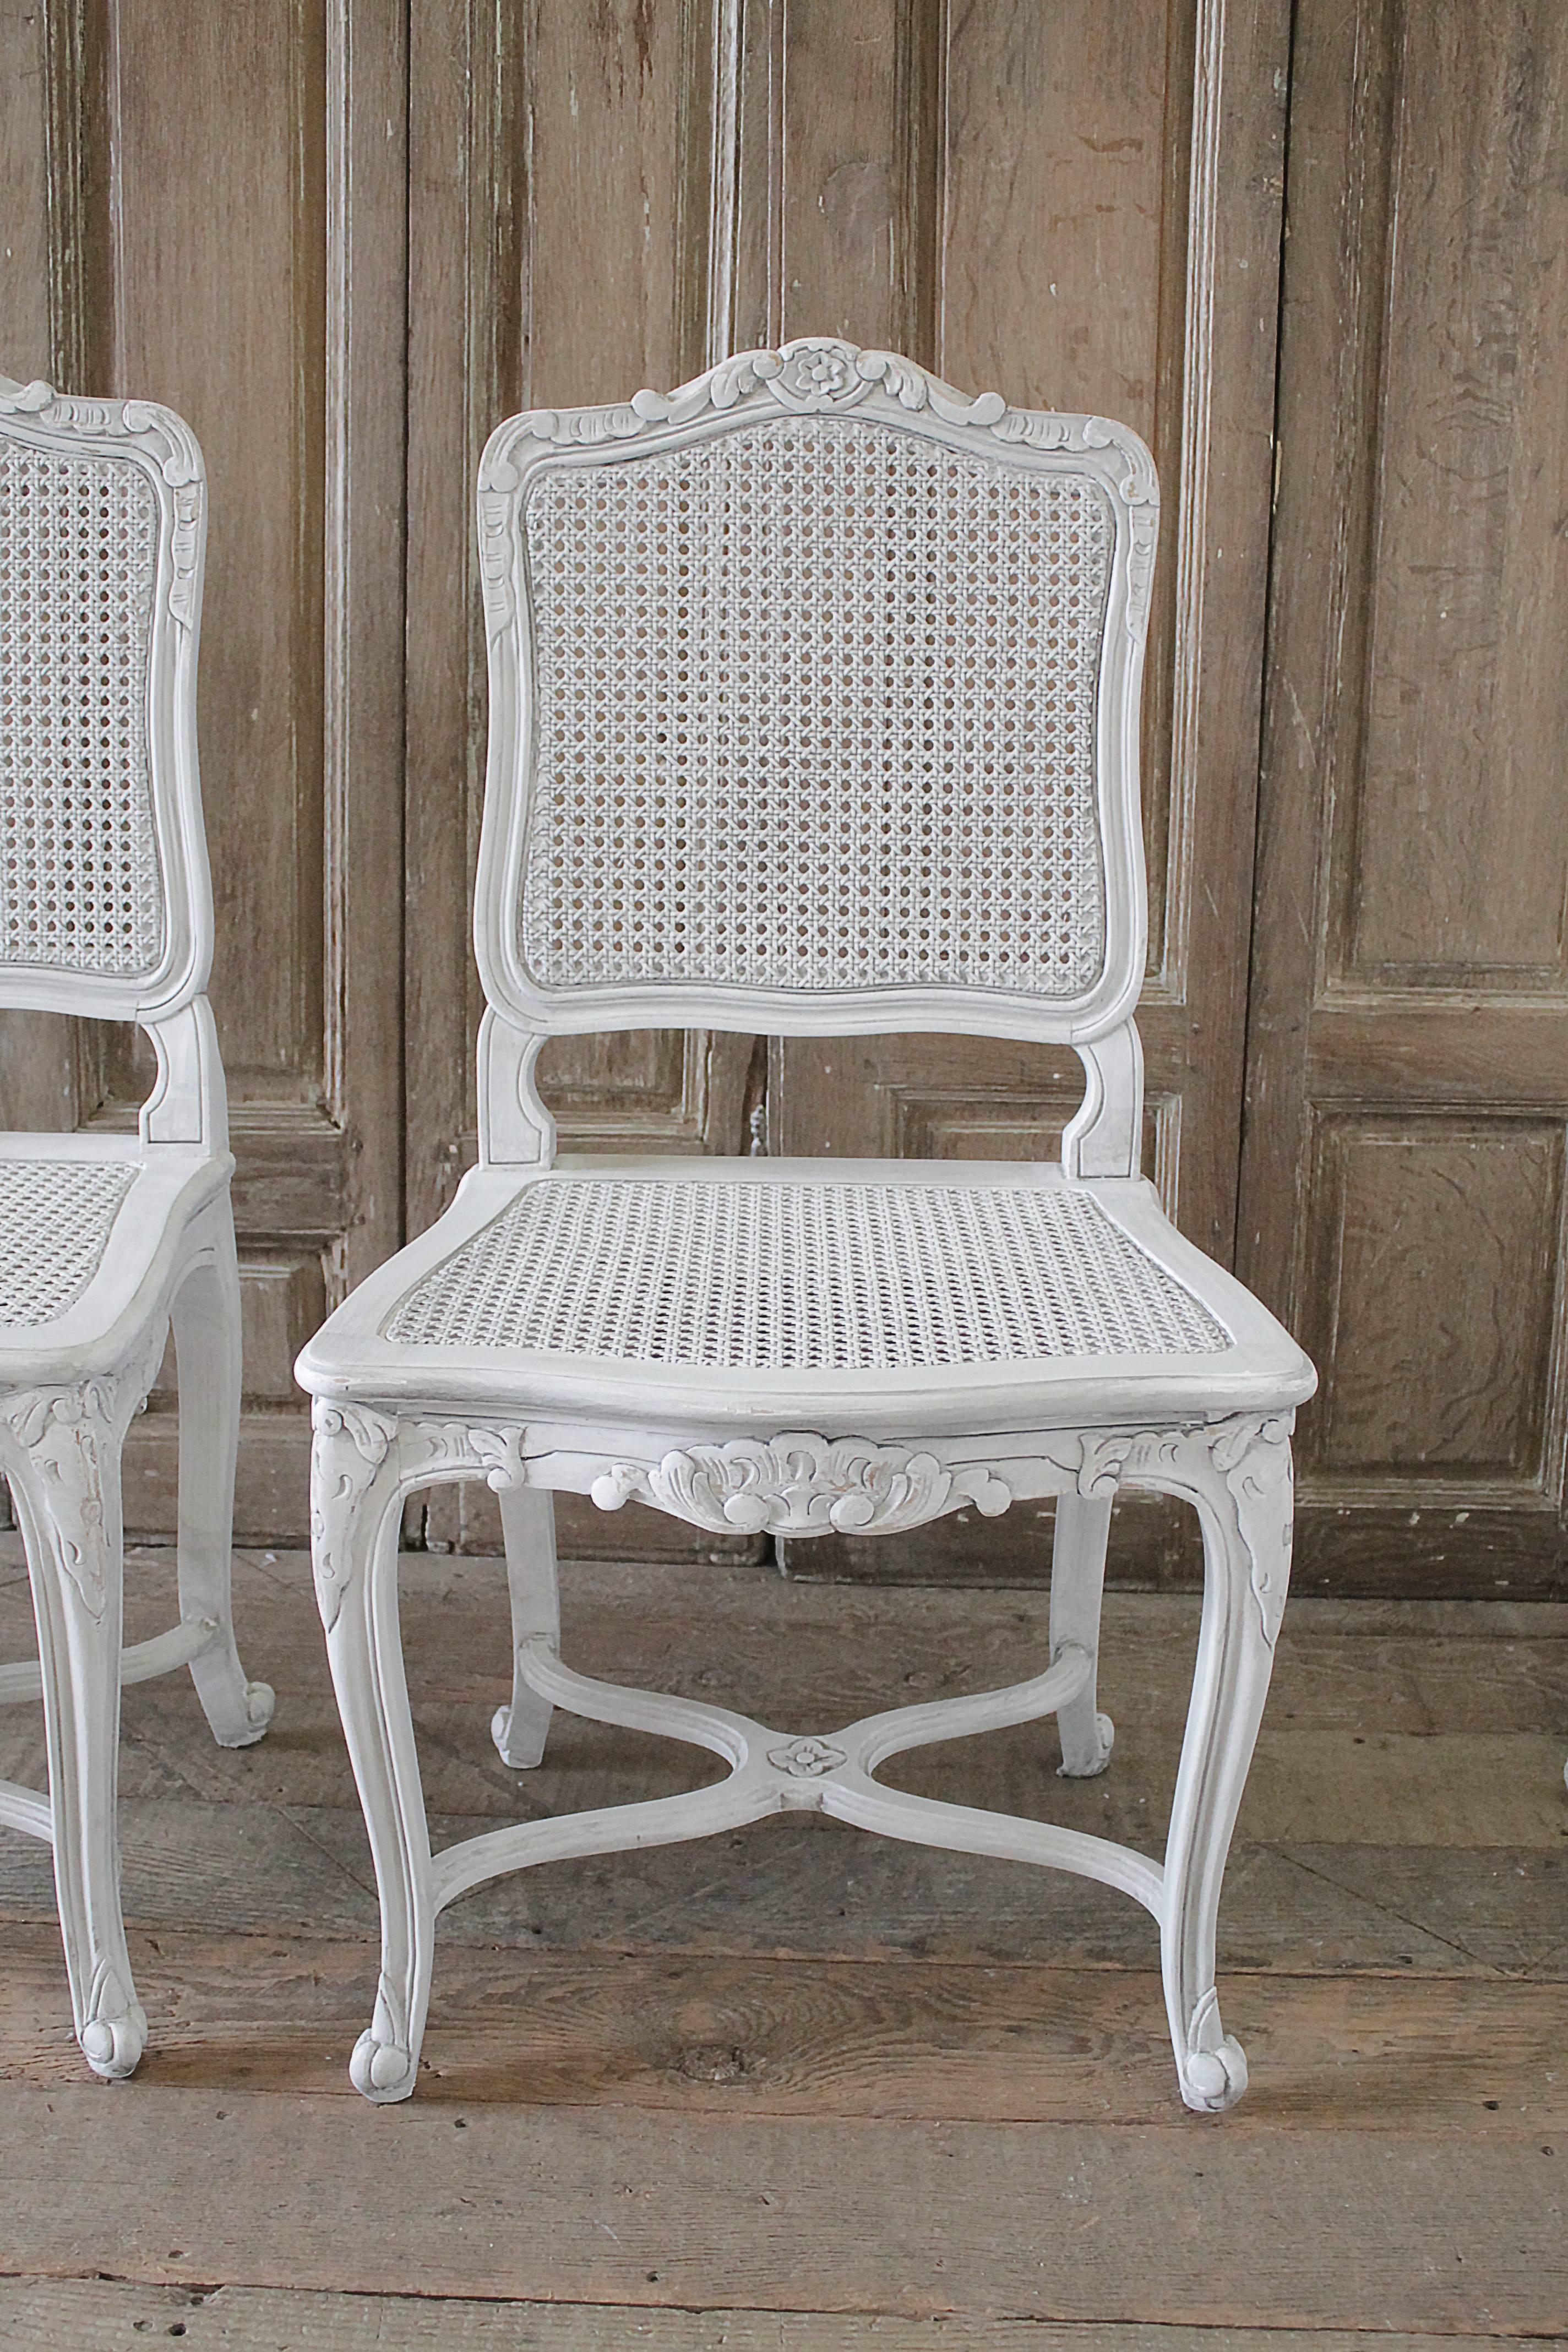 Seat of four antique French Country style cane back dining chairs
Painted in oyster white, with subtle distressed edges, and finished with an antique glaze. Color of the paint is a subtle soft grayish tone.
Cane is solid and strong on the seats